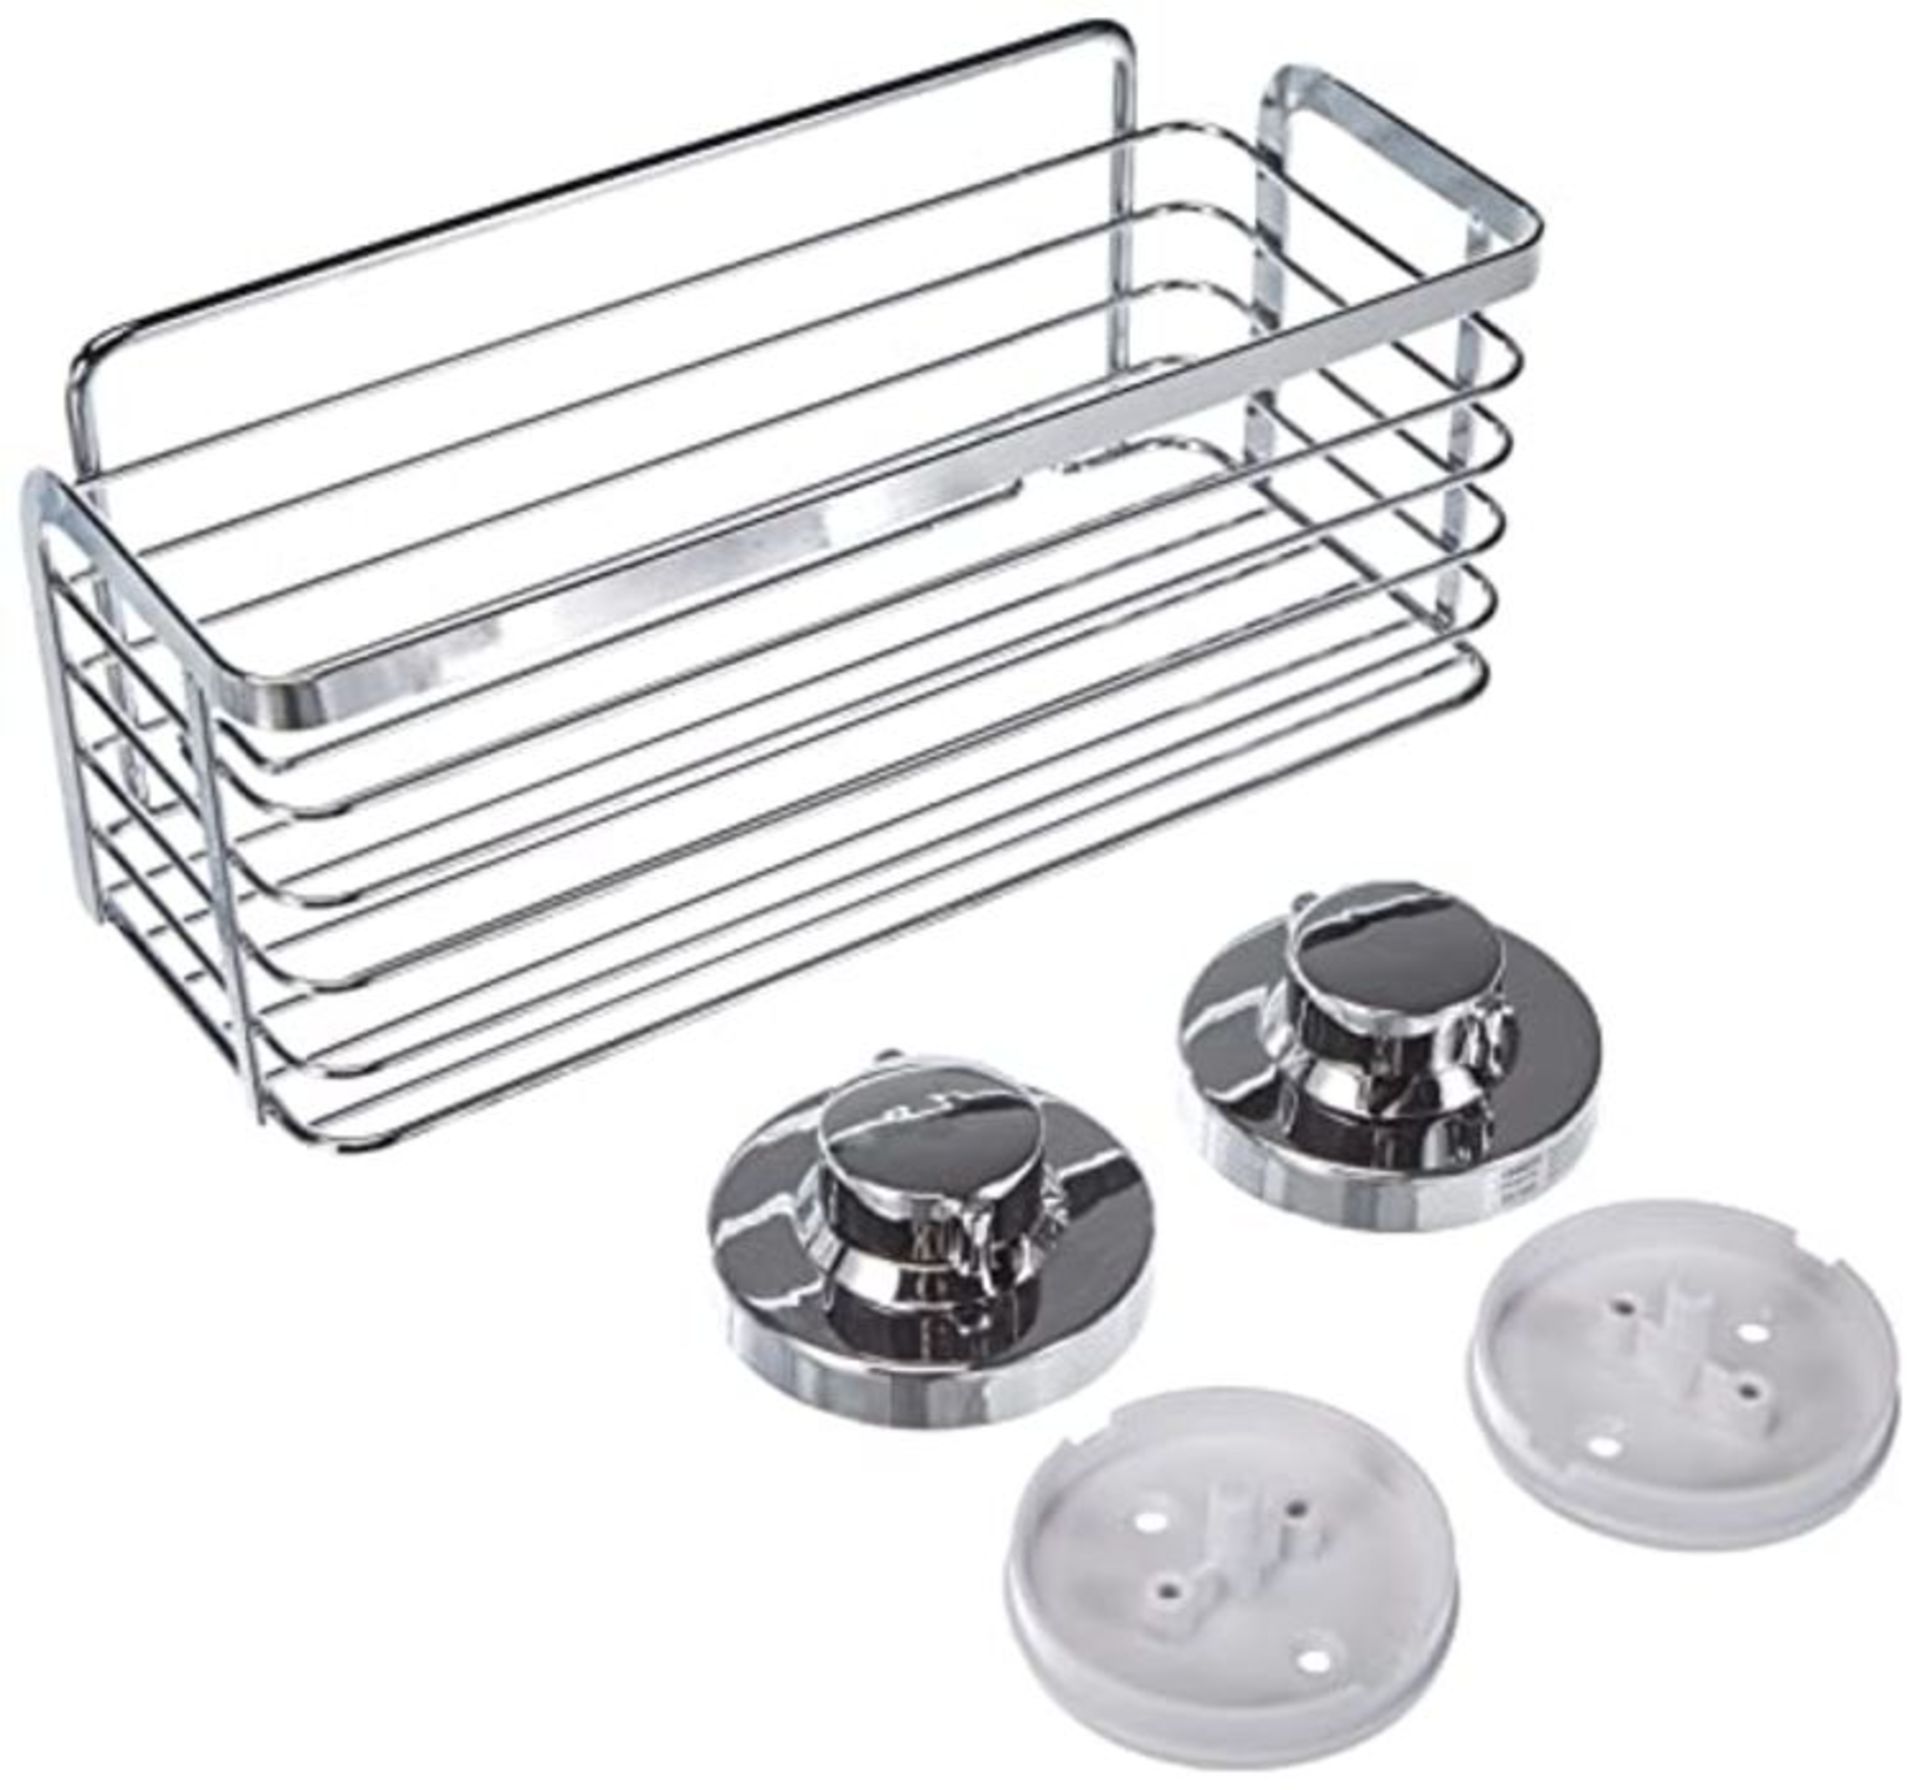 Cornat Shower Basket 3 in 1 Wall Mounted 3 Different Mounting Options with Suction Cup